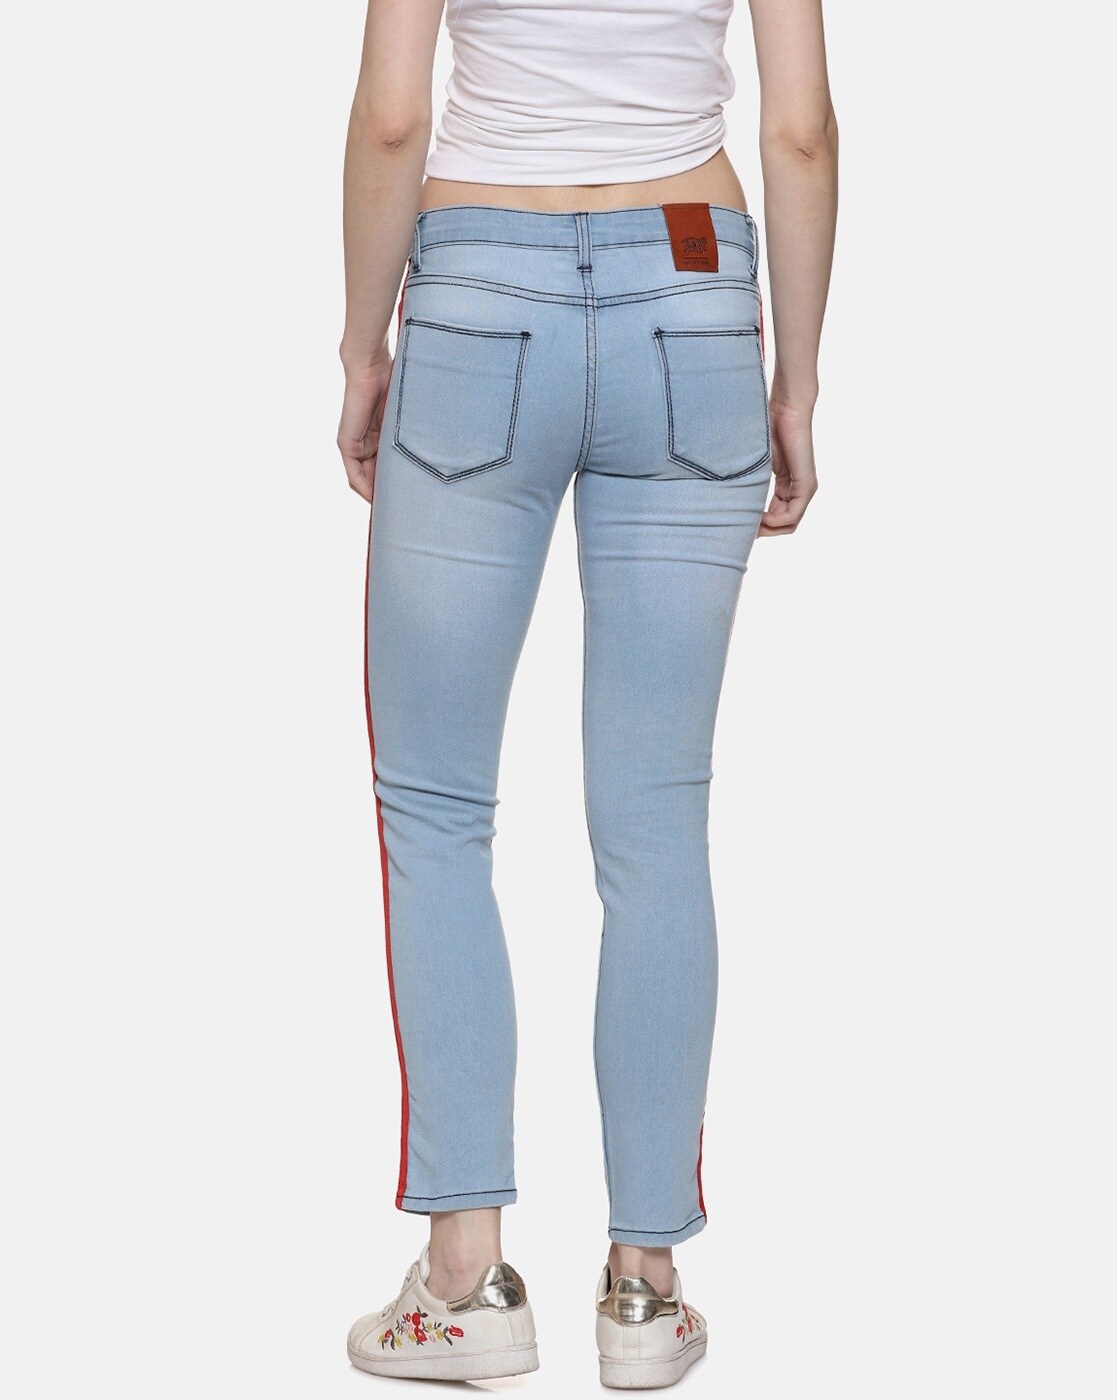 Buy Navy Blue Jeans & Jeggings for Women by FASHION STYLUS Online | Ajio.com